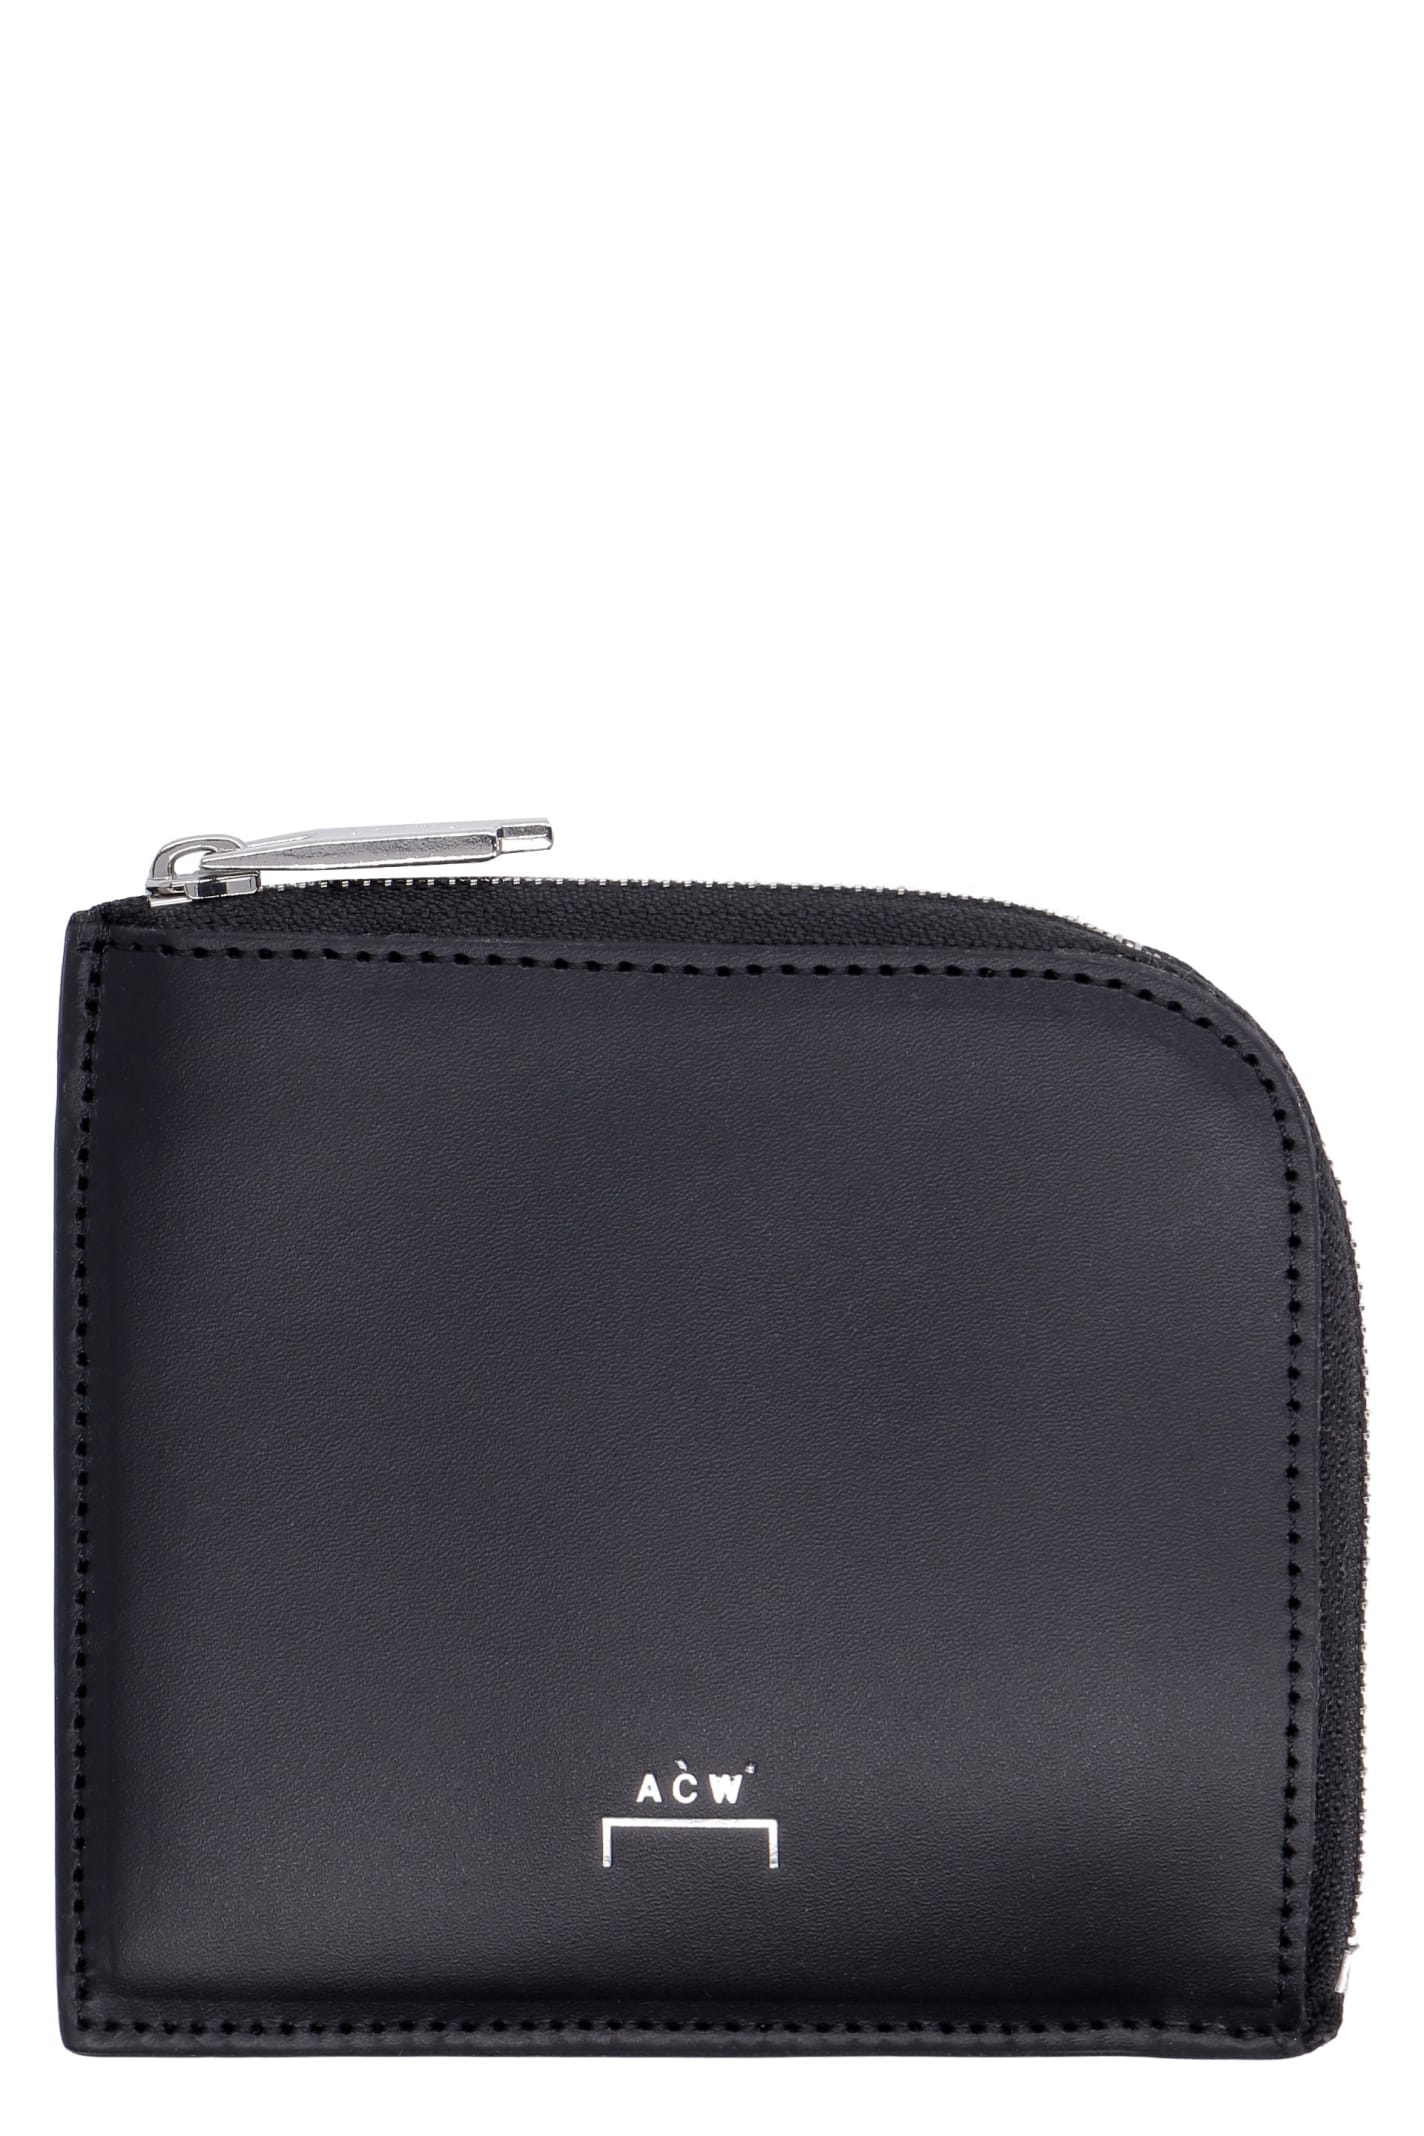 A-COLD-WALL Leather Coin Purse